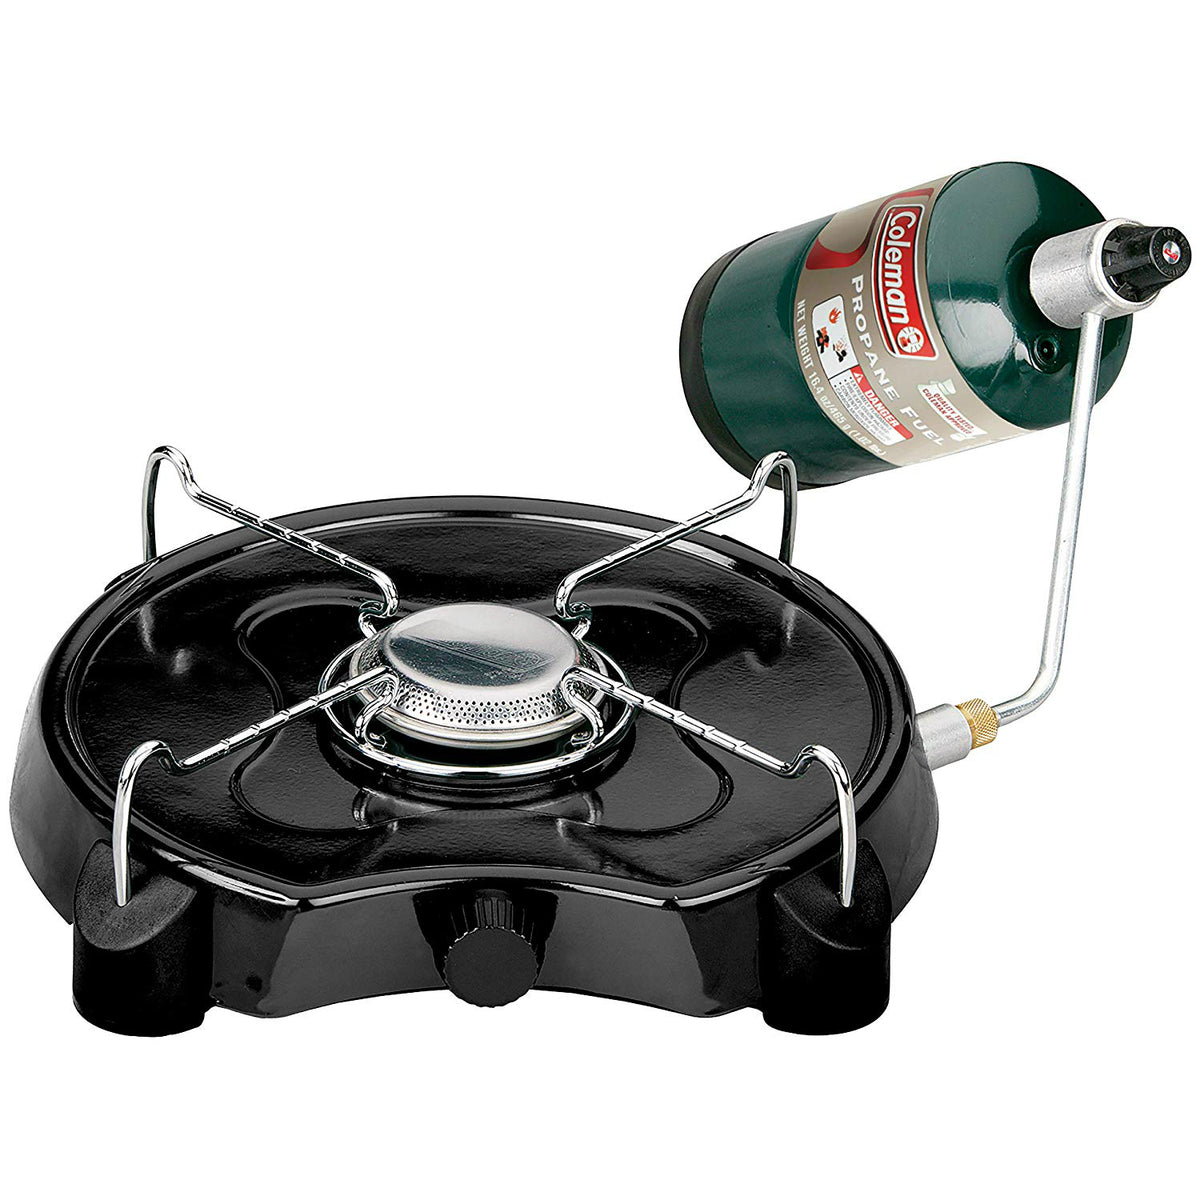 buy stoves & grills at cheap rate in bulk. wholesale & retail camping tools & essentials store.